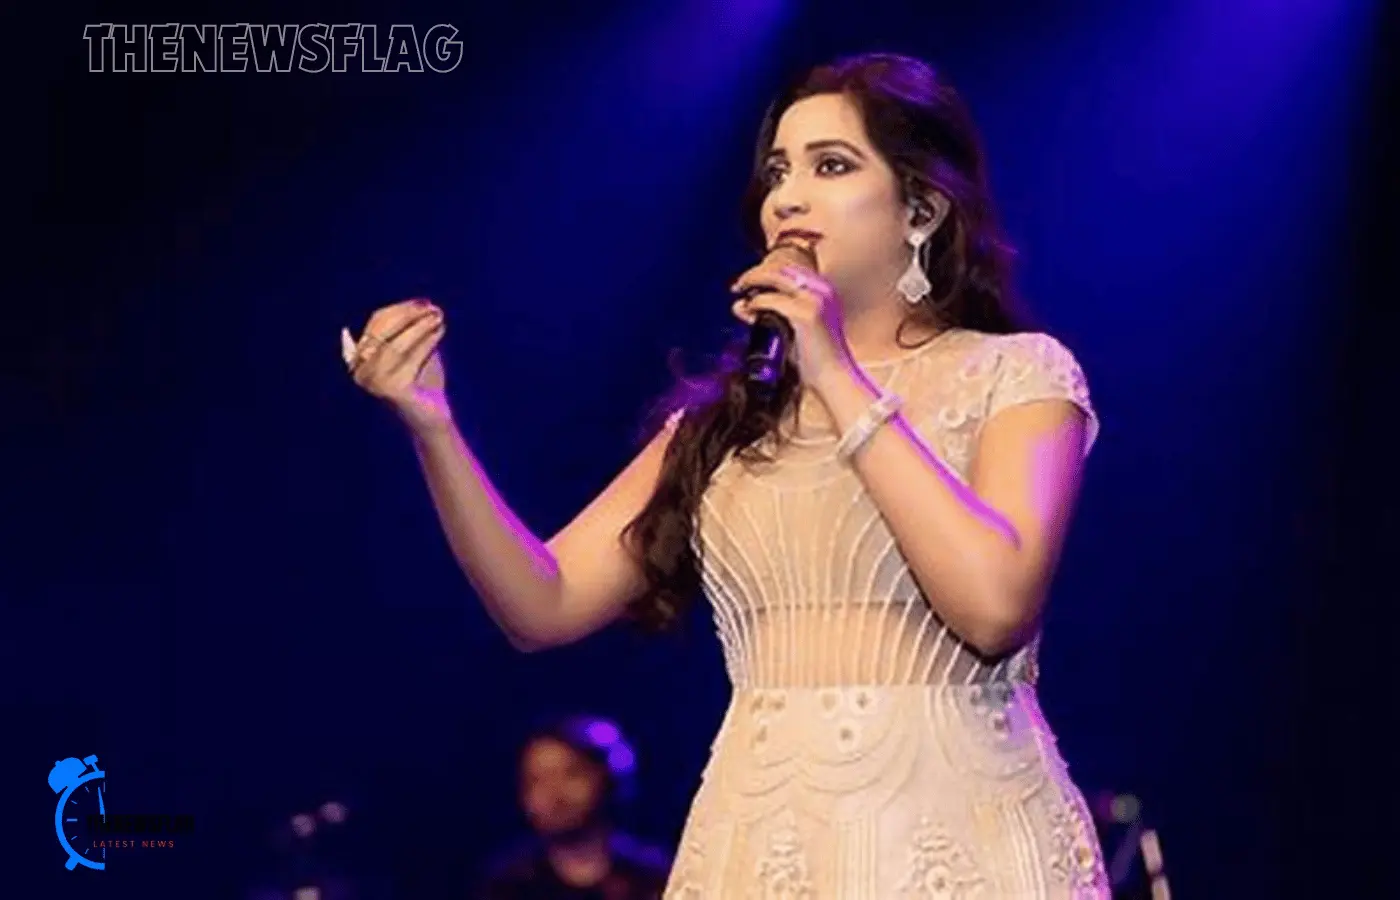 When Shreya Ghoshal discussed actors who sing for films, she shared her thoughts on Alia Bhatt's Samjhawan rendition.